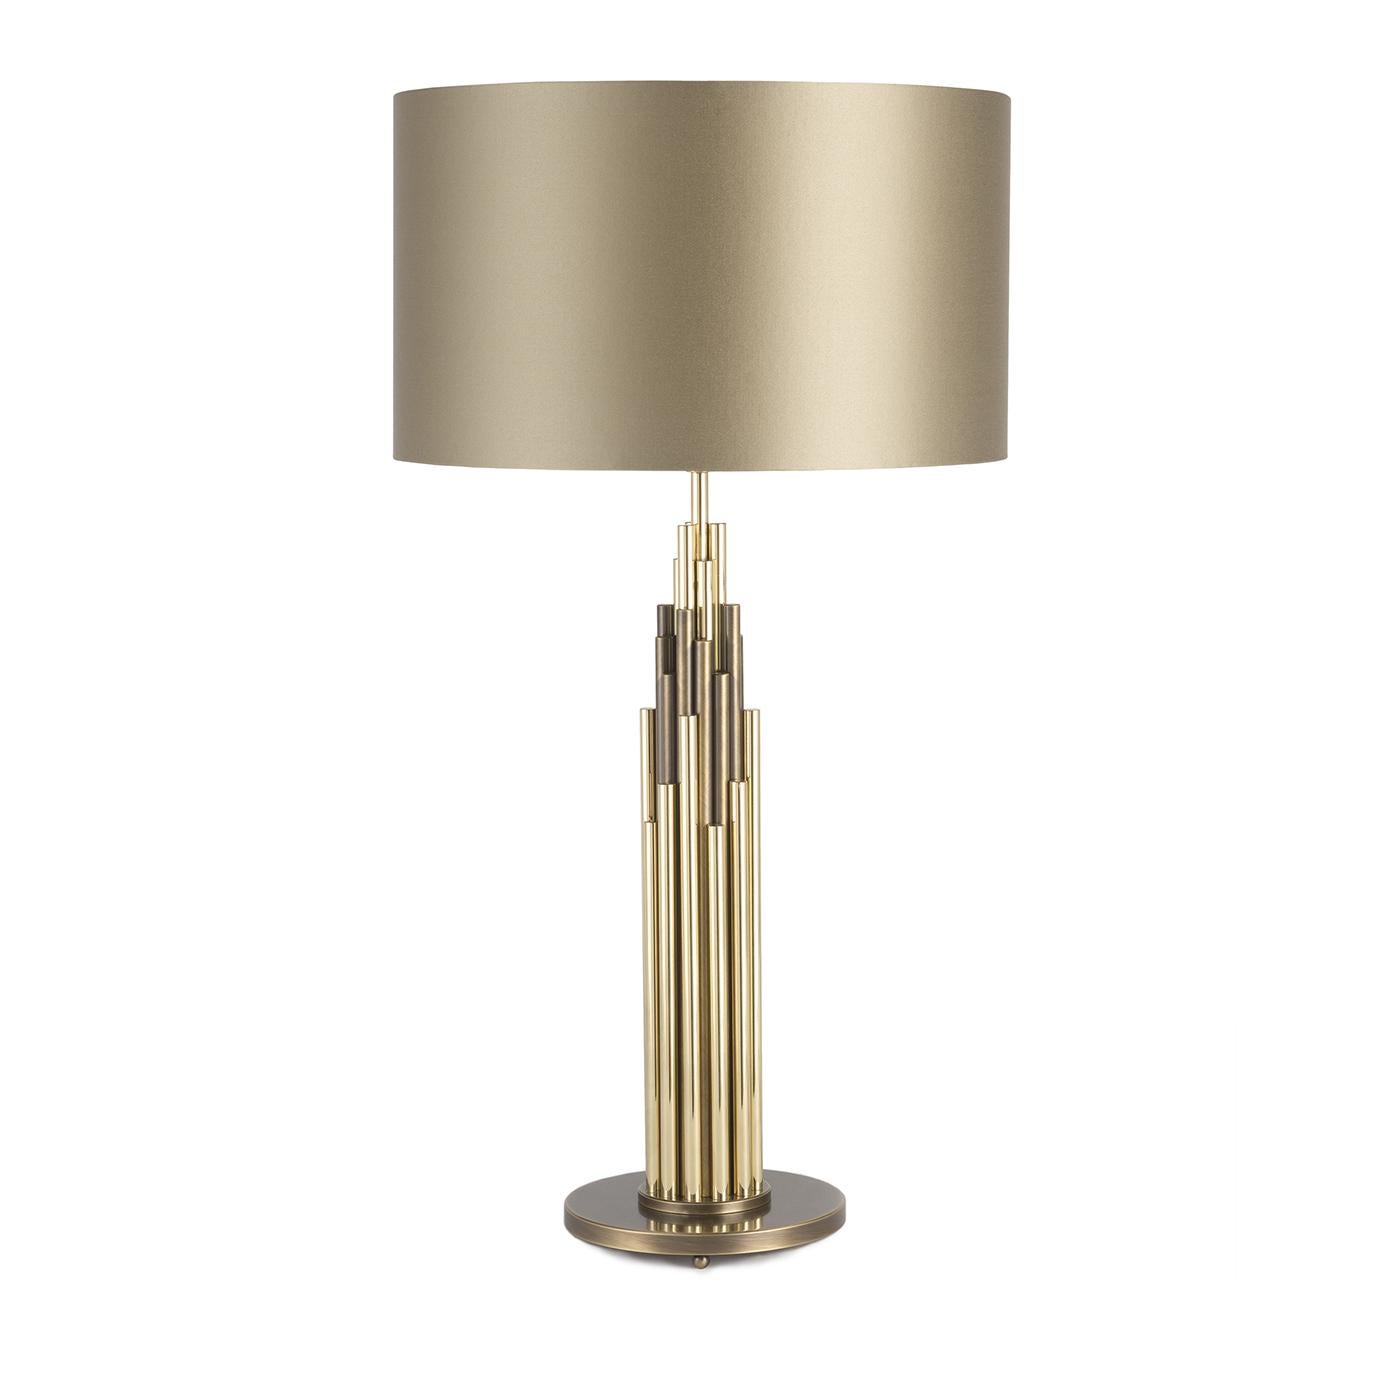 This elegant table lamp is part of the Shine collection and features a bronzed brass circular base supporting a series of vertical brass elements of different heights, some with a natural finish, some with a bronzed coloration. The satin shade above